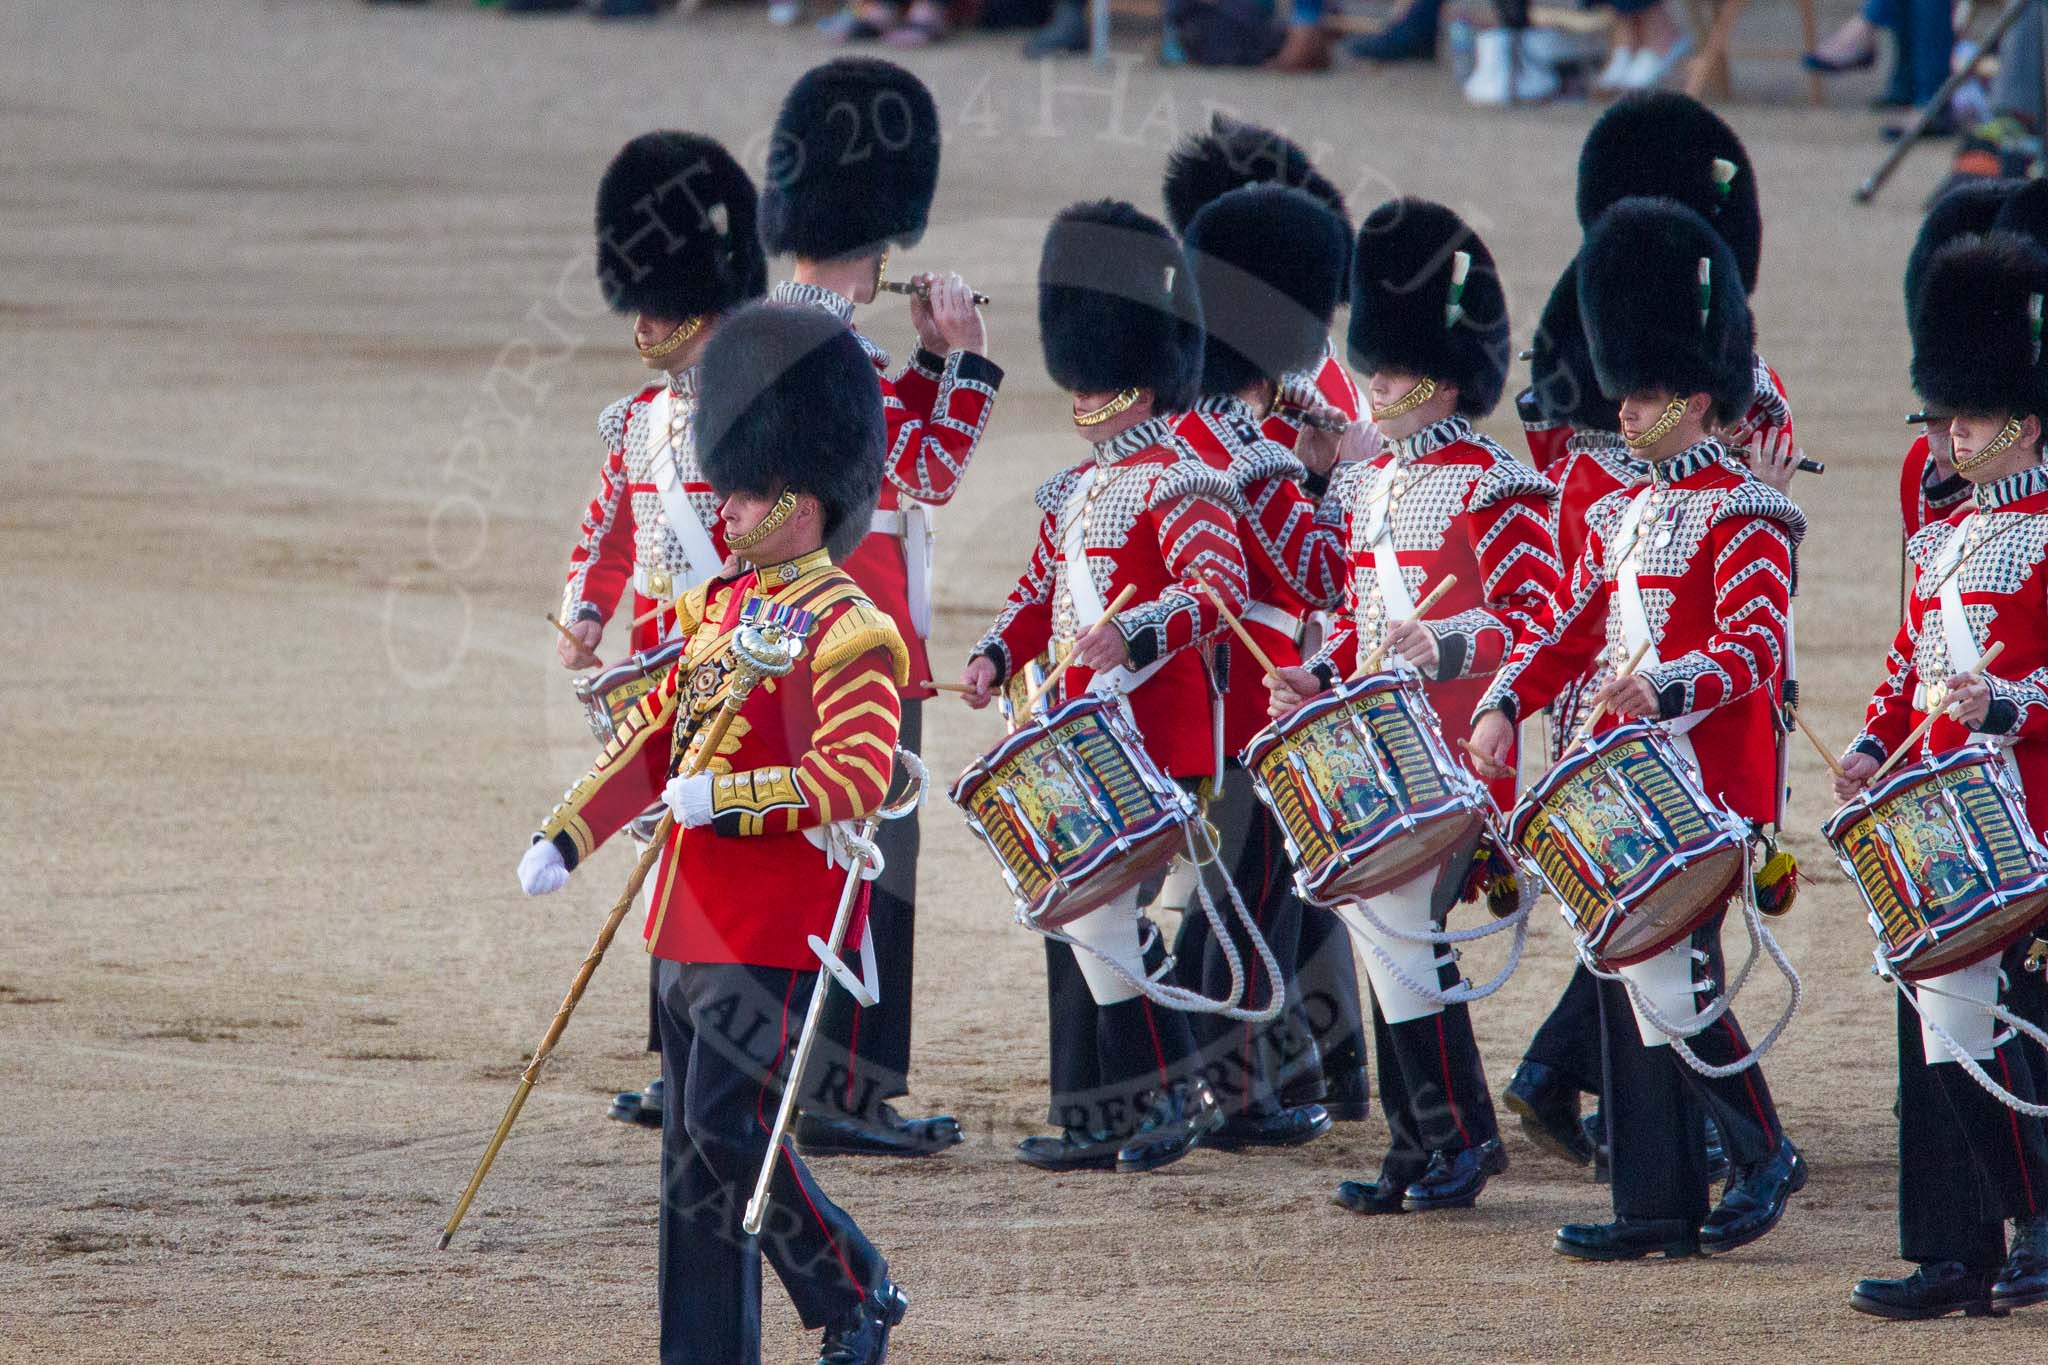 Beating Retreat 2014.
Horse Guards Parade, Westminster,
London SW1A,

United Kingdom,
on 11 June 2014 at 21:03, image #256